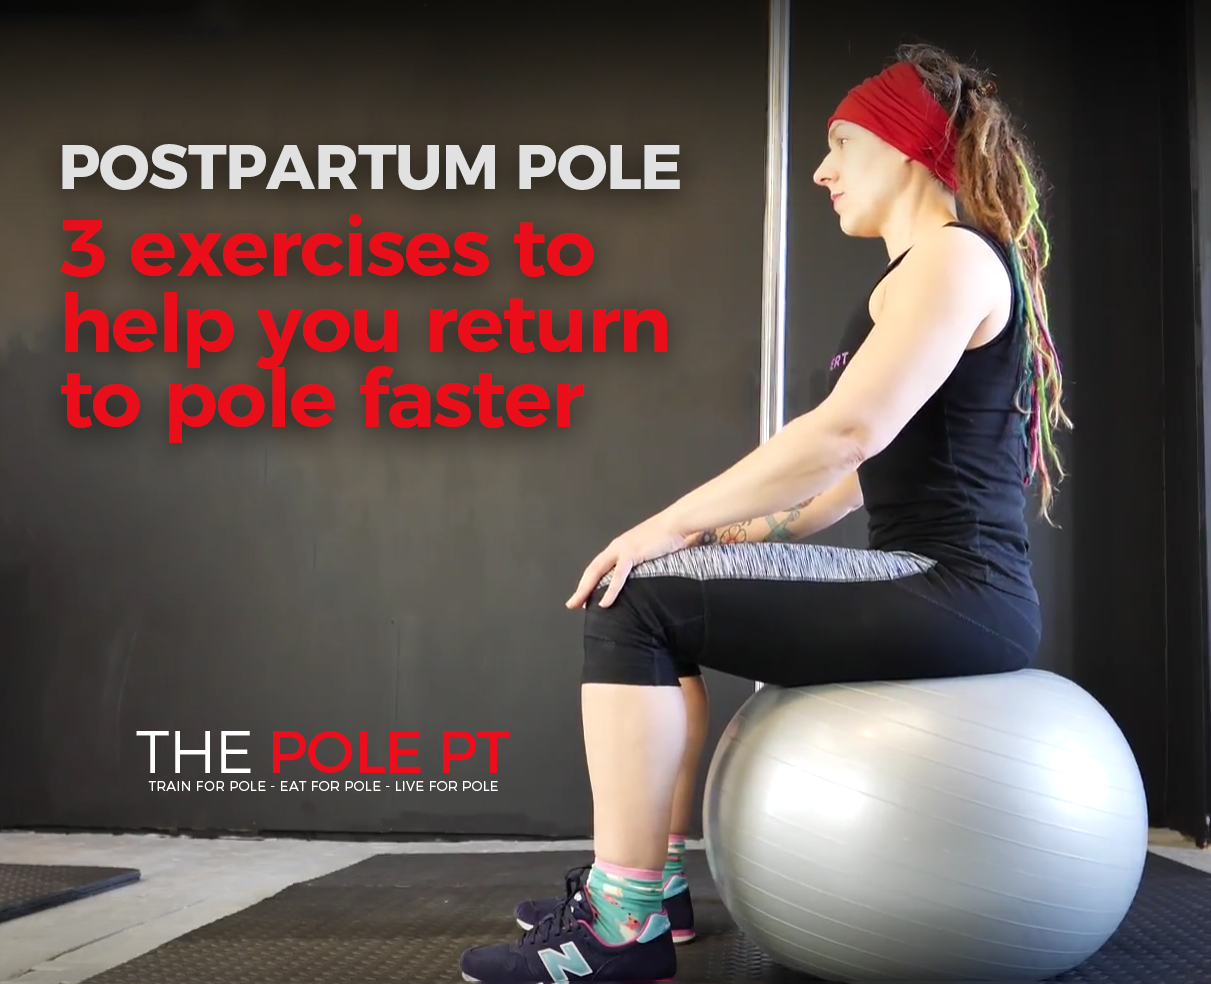 Postpartum pole – 3 exercises to help you return to pole faster